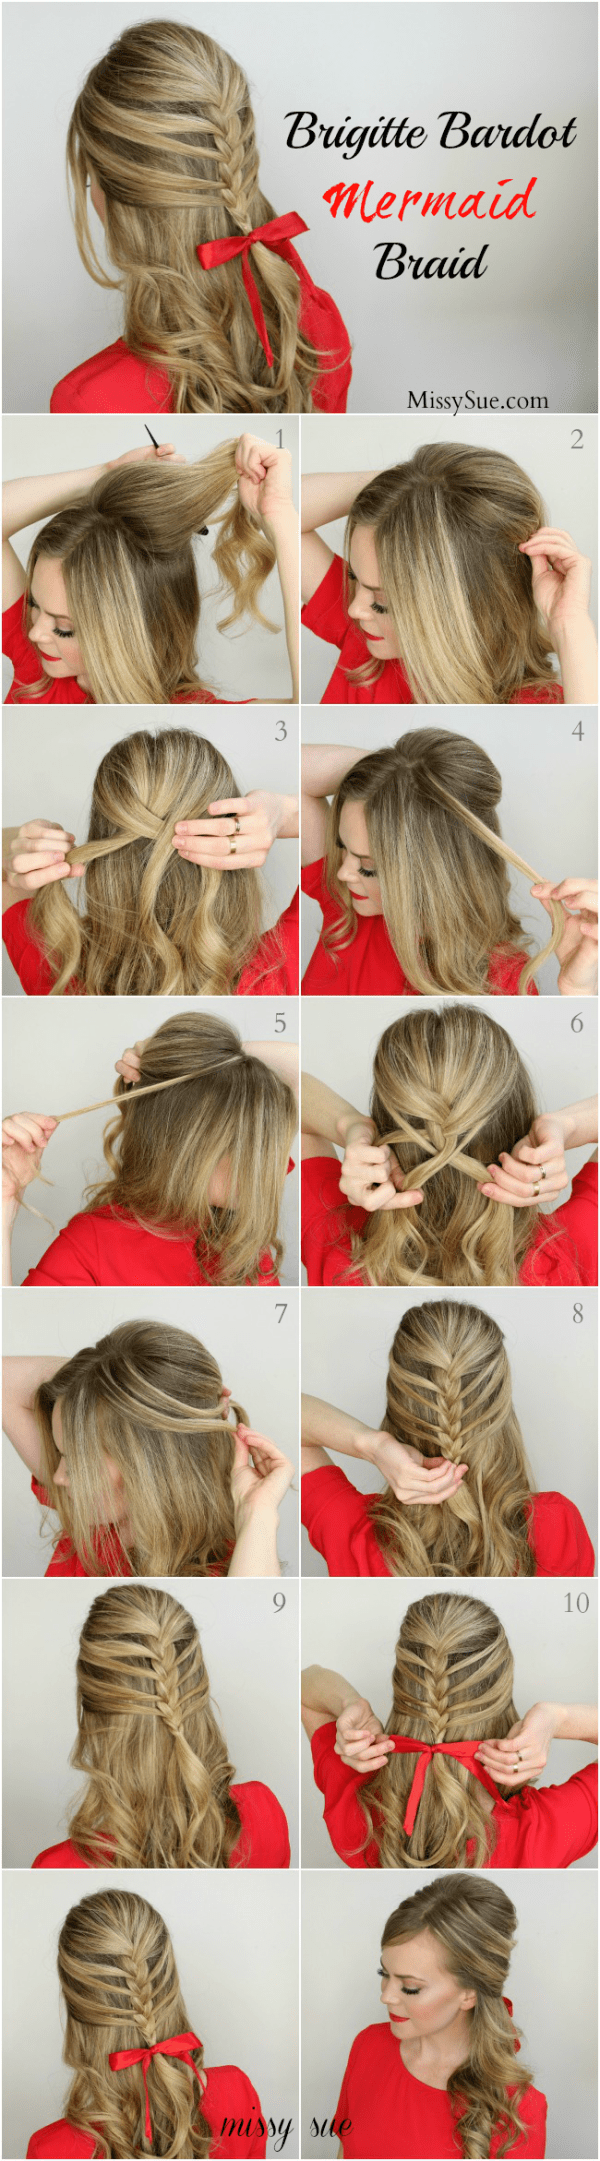 19 Lazy Girls Hairstyle DIY Ideas For All Busy Mornings 